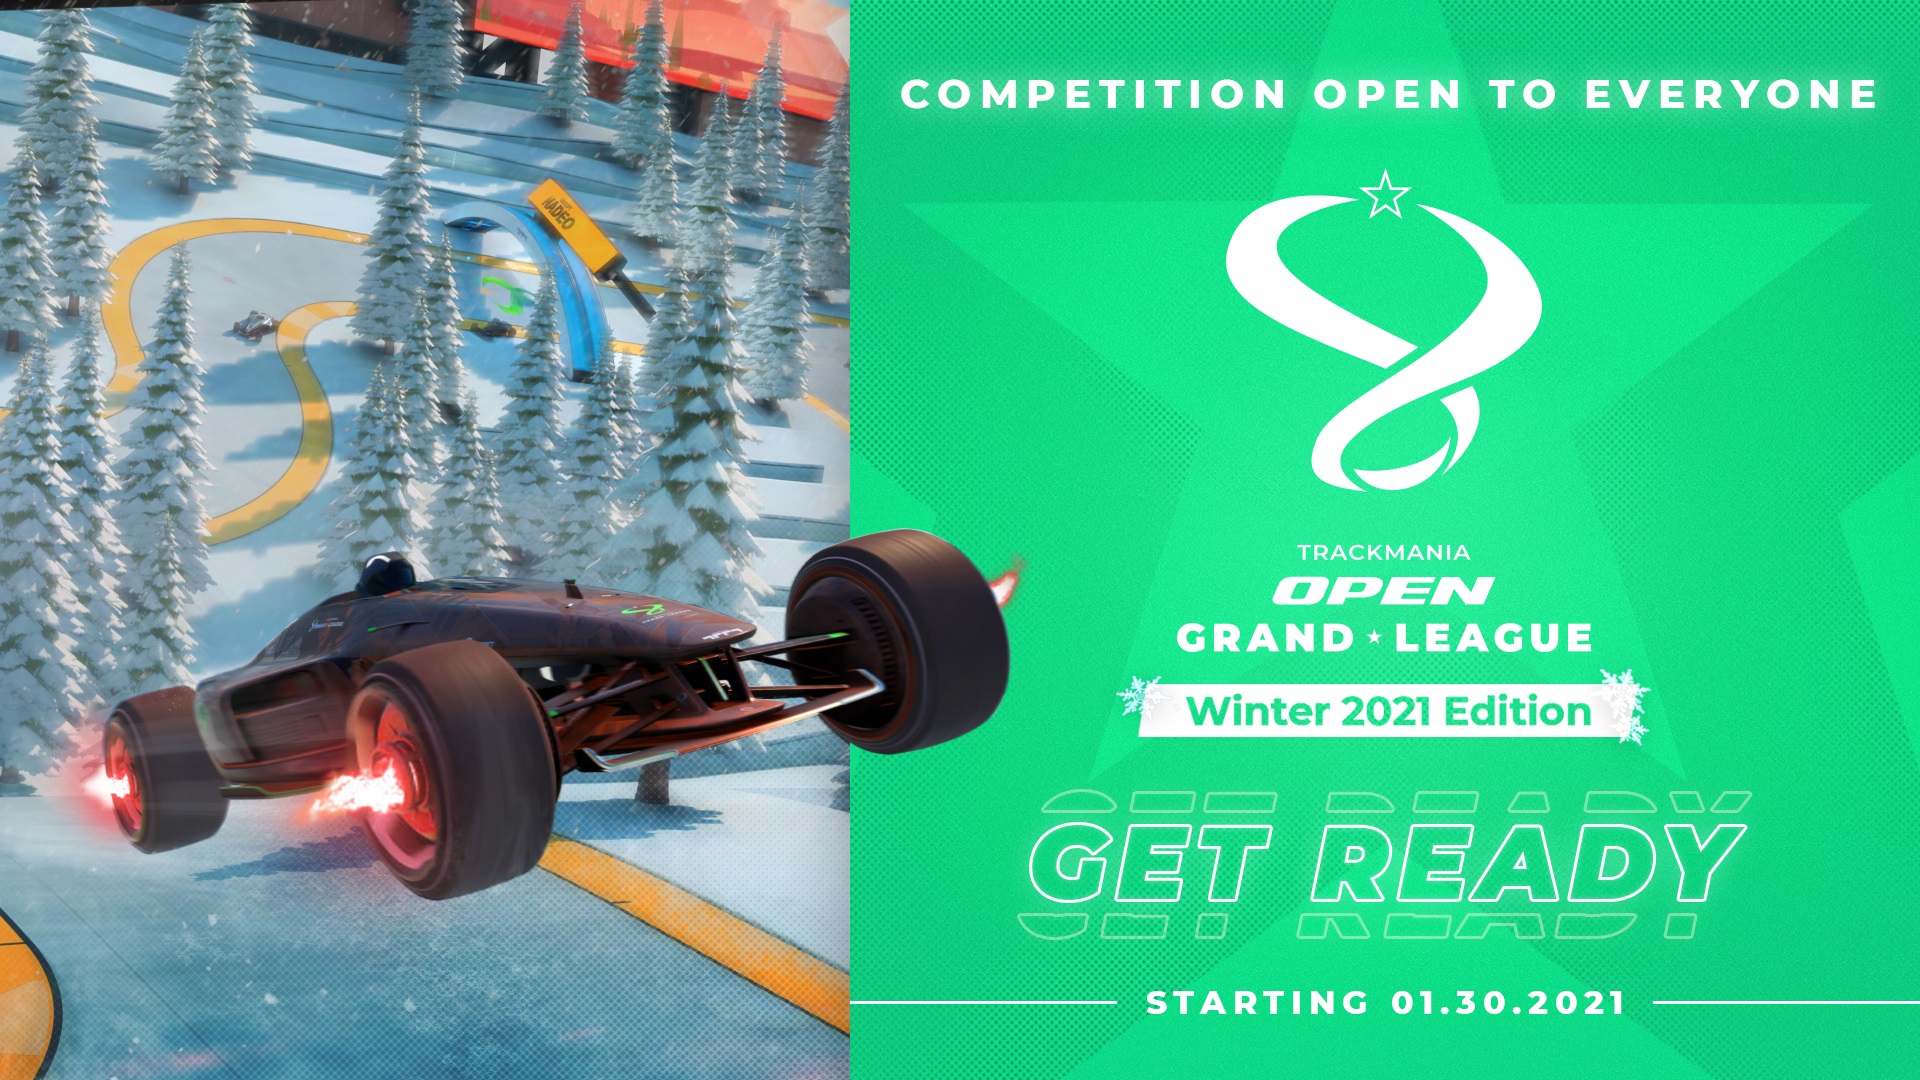 How can you participate in the Open Grand League